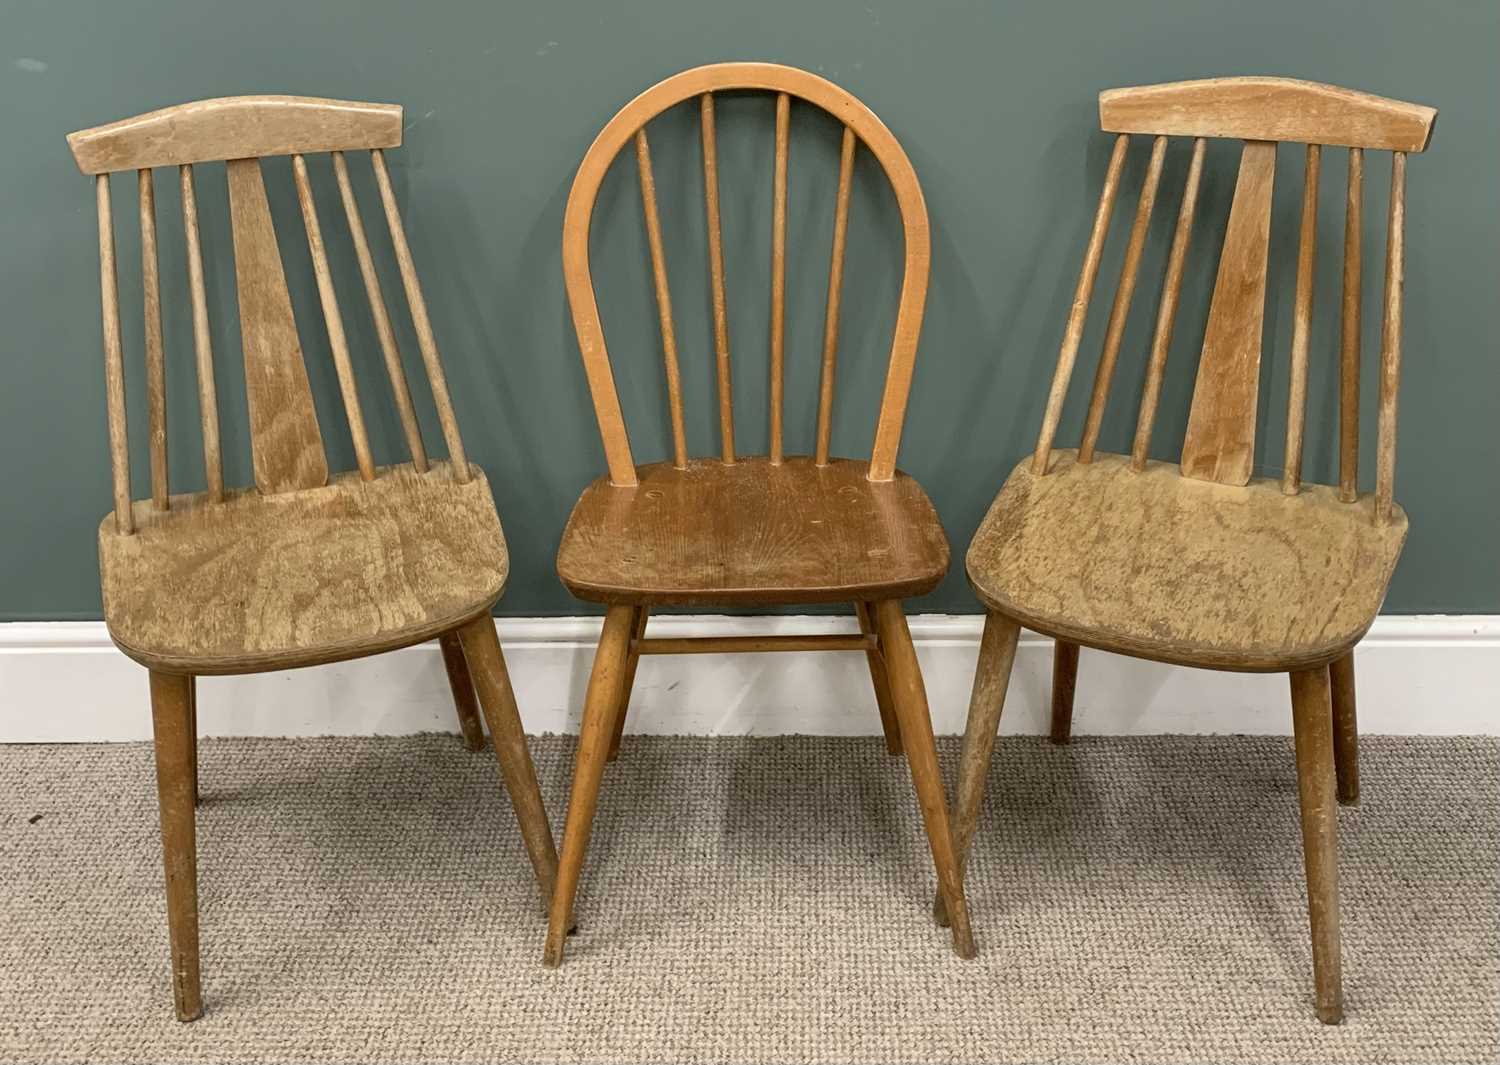 VARIOUS CHAIRS to include Windsor, wheelback, farmhouse and a carved Eisteddfod chair (13) - Image 3 of 8